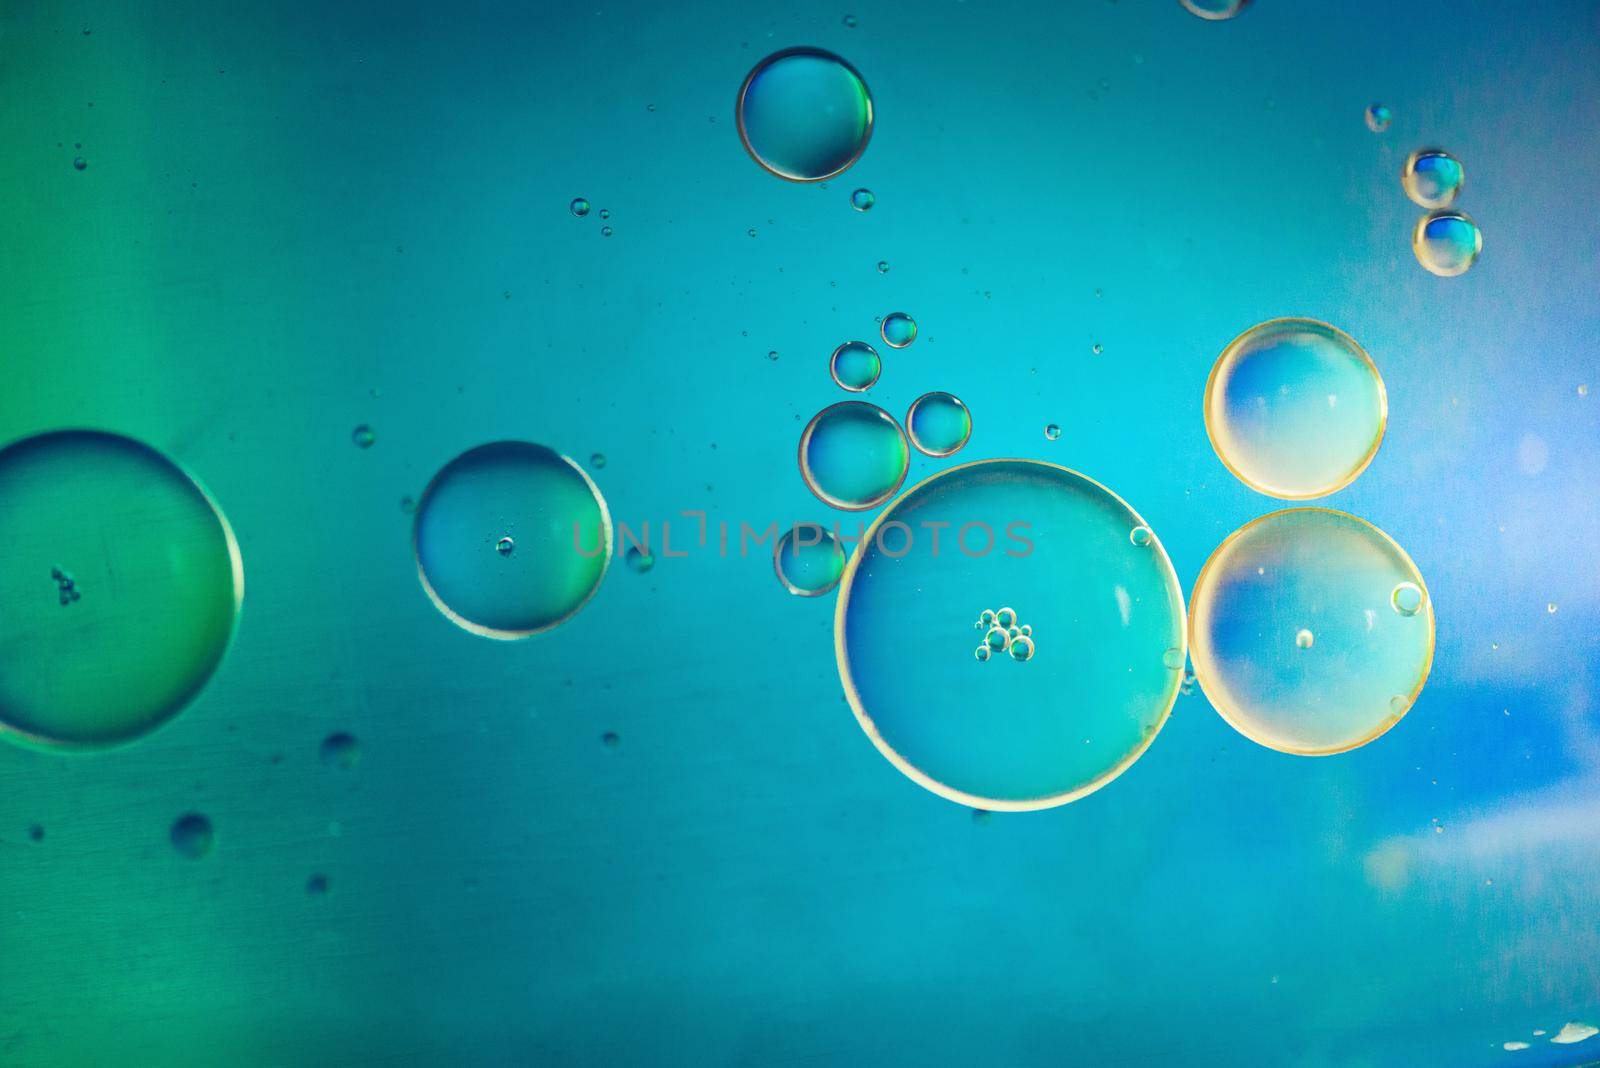 Oil drops in water. Abstract psychedelic pattern image multicolored. Abstract background with colorful gradient colors. DOF